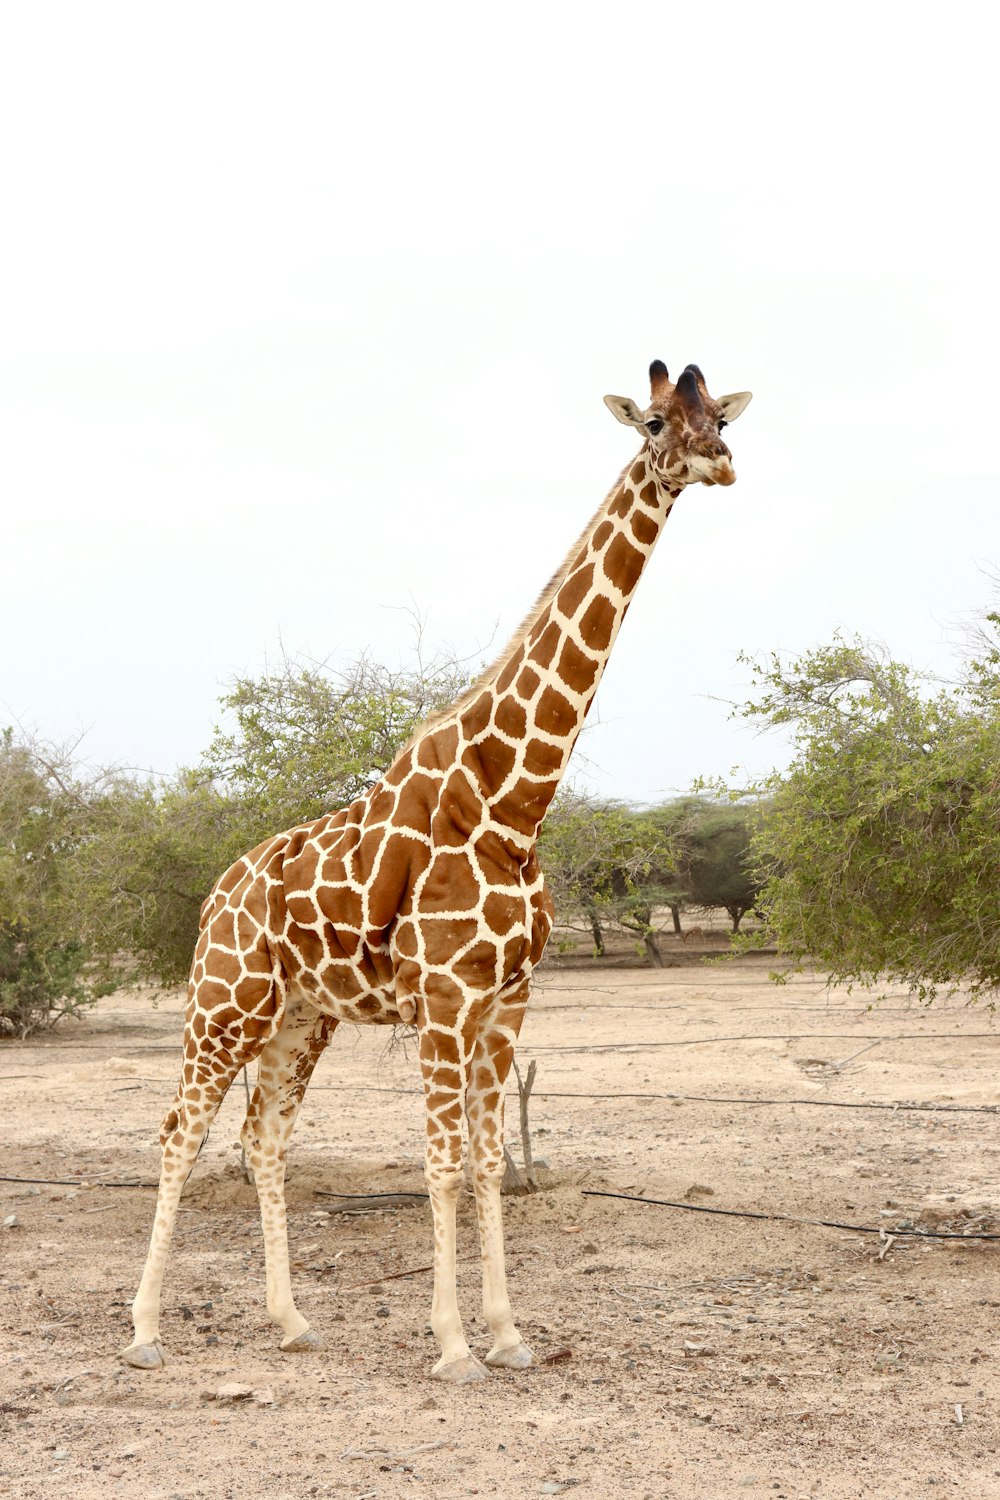 a giraffe standing in the middle of a dirt field